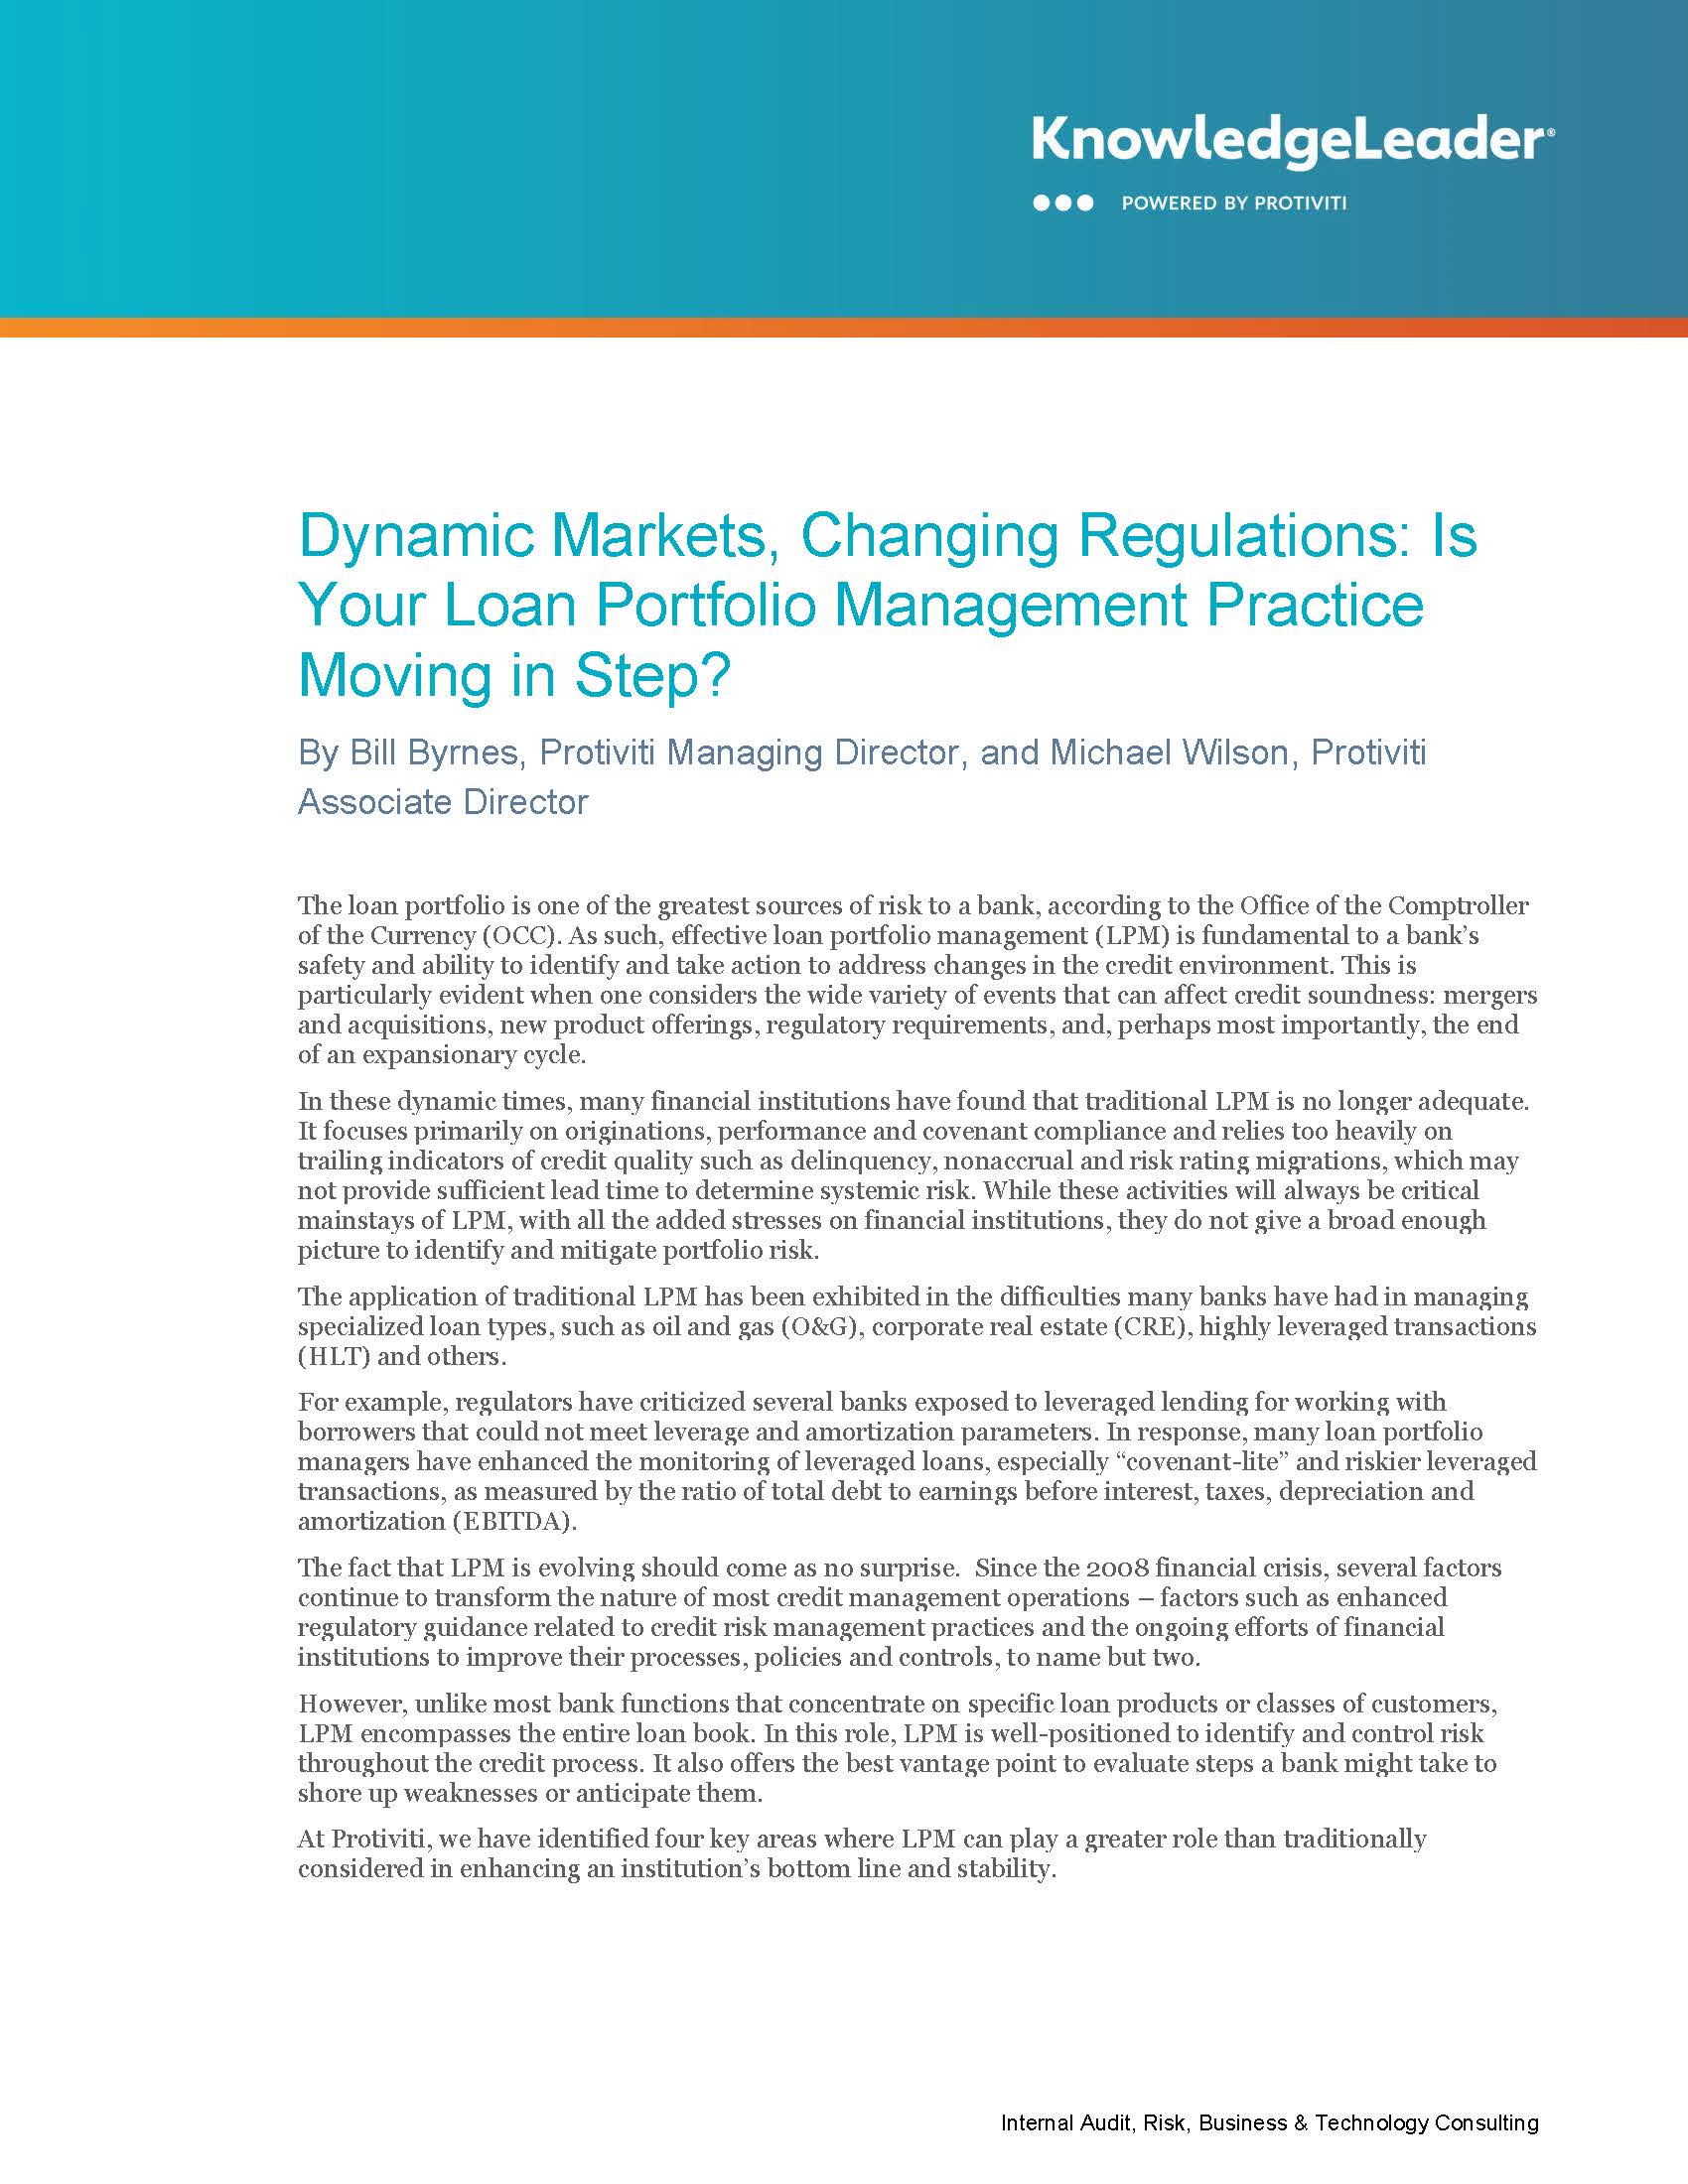 Screenshot of the first page of Dynamic Markets, Changing Regulations Is Your Loan Portfolio Management Practice Moving in Step